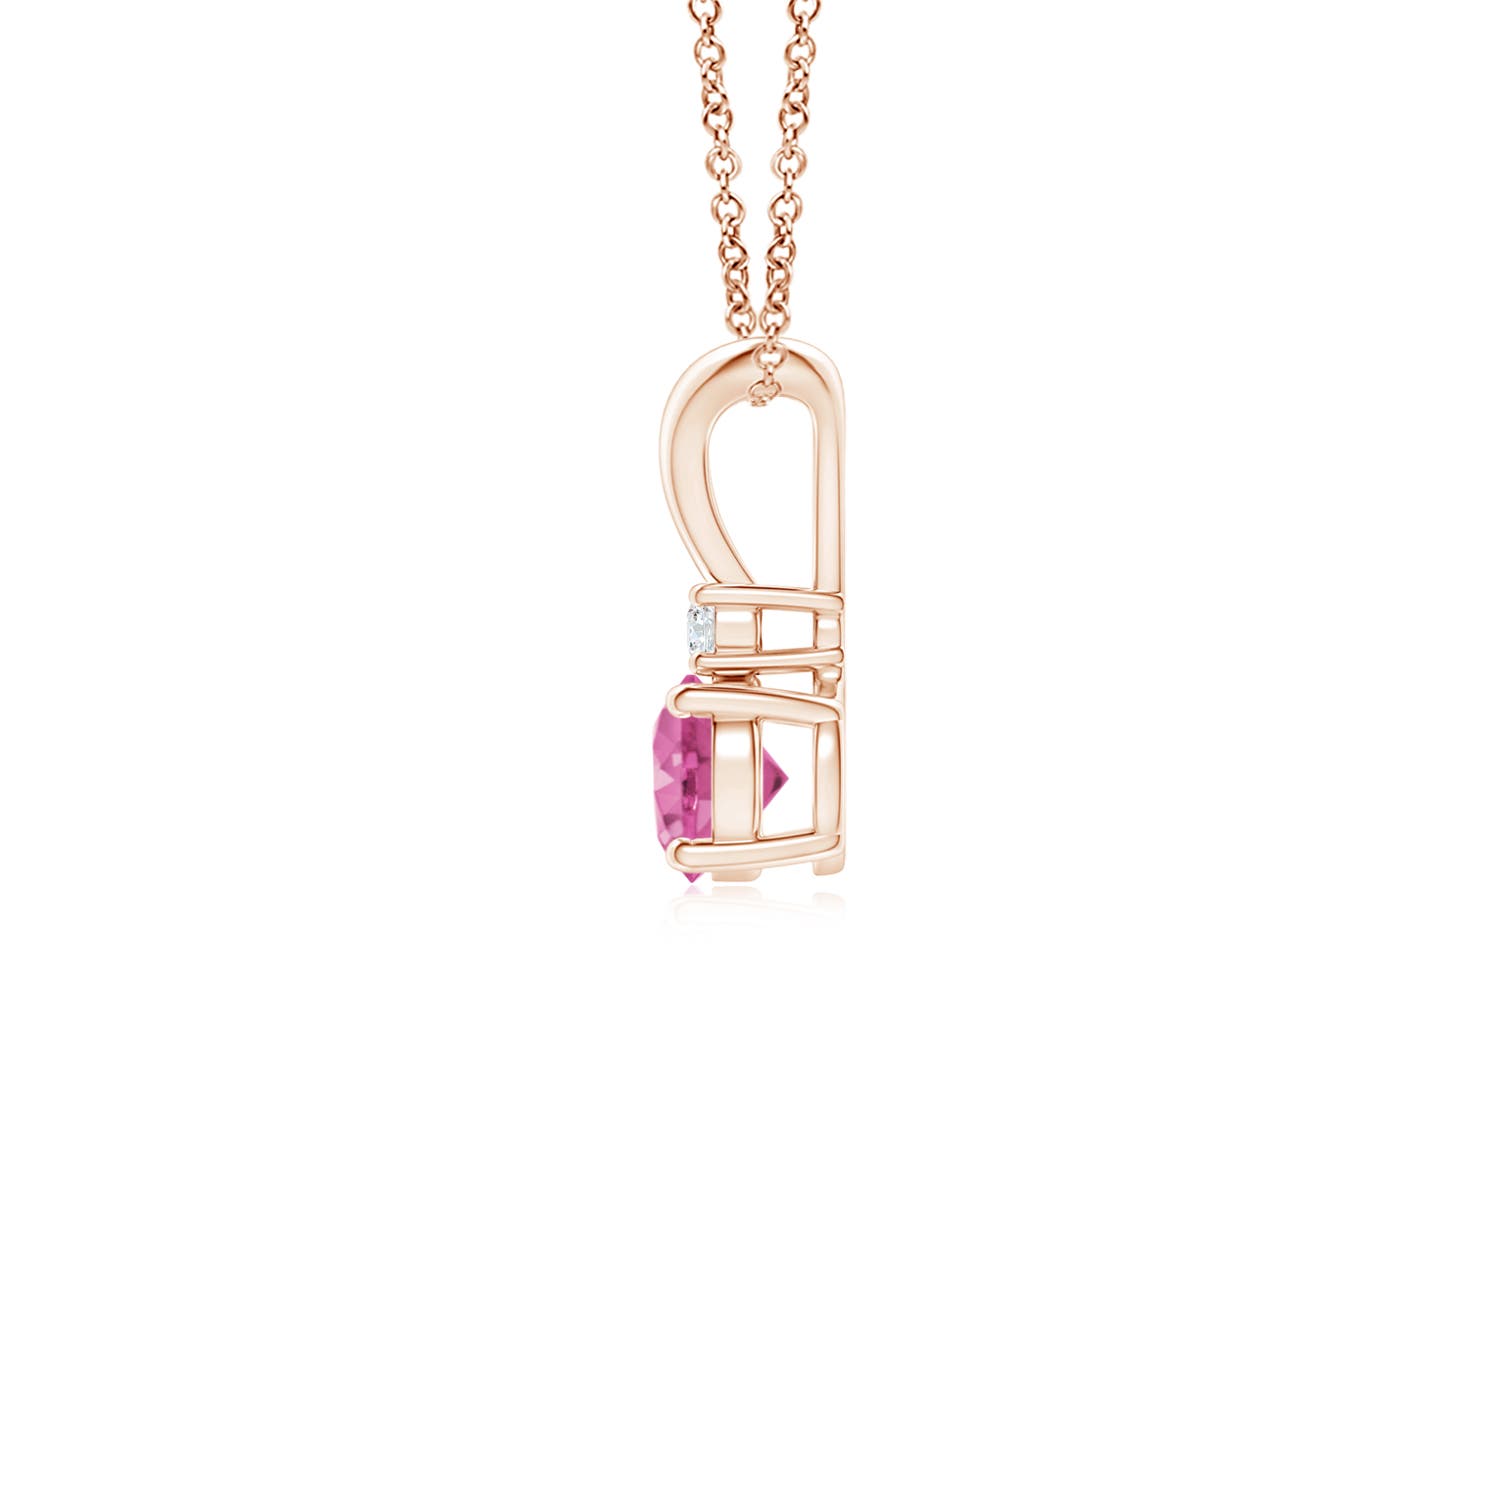 AAA - Pink Sapphire / 0.34 CT / 14 KT Rose Gold